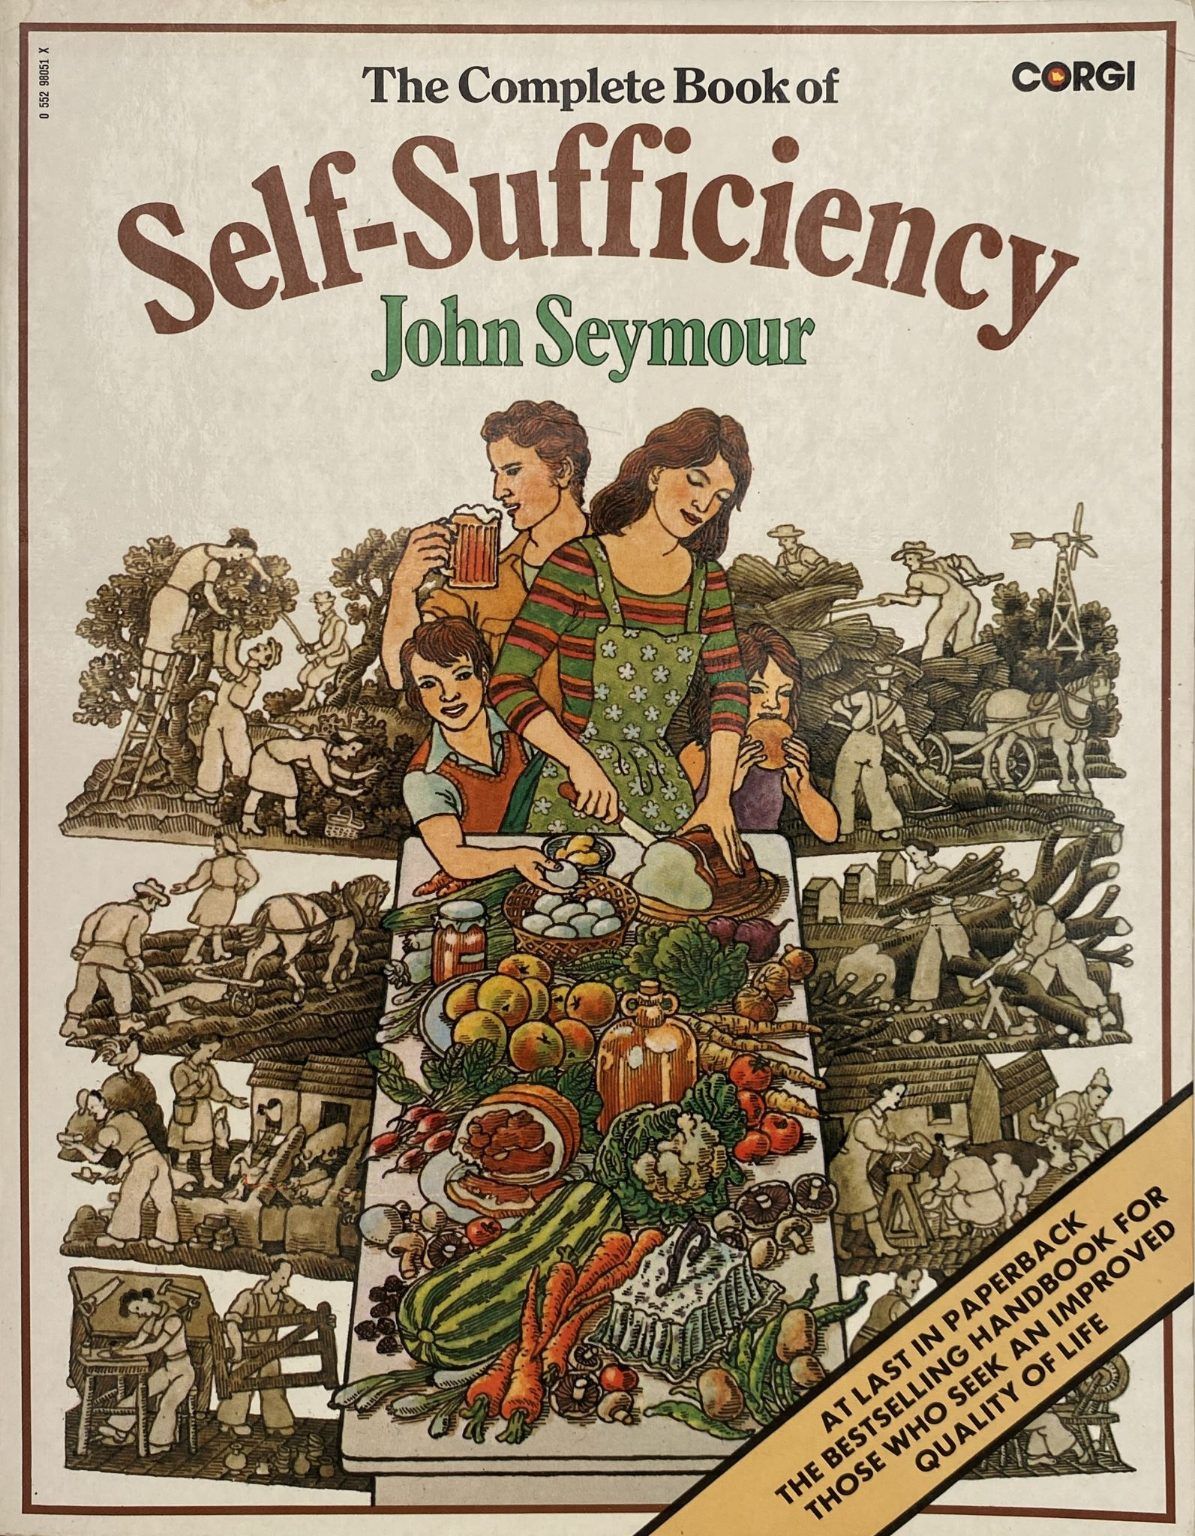 THE COMPLETE BOOK OF SELF-SUFFICIENCY